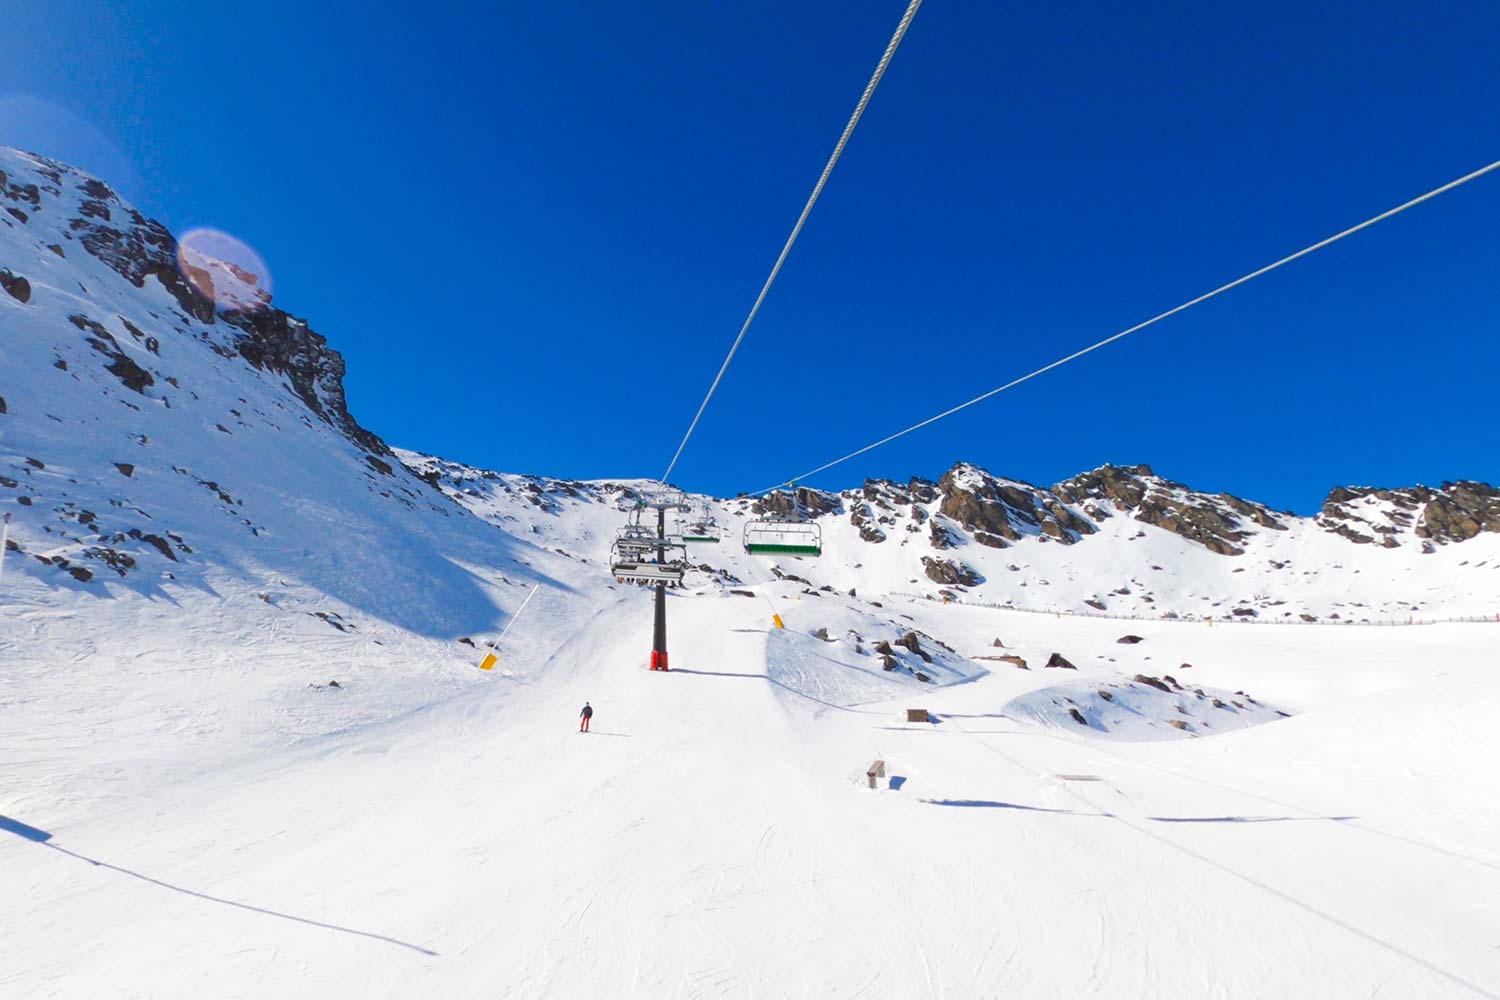 views of a chair lift and piste with blue skies overhead